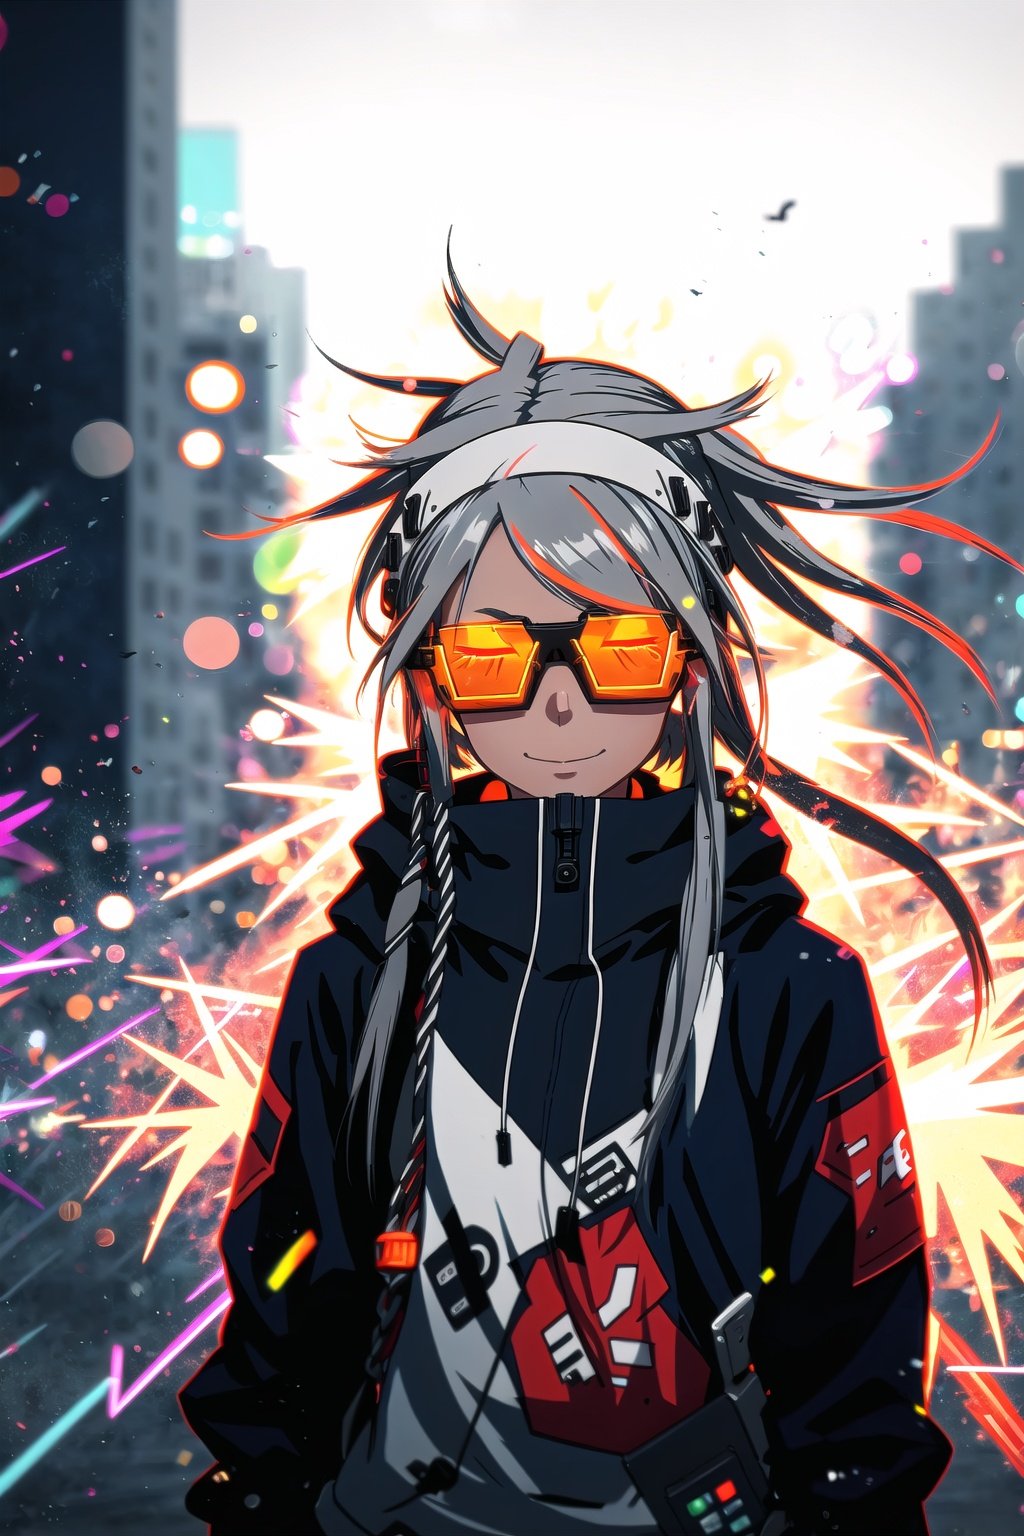 guiltys, happy, a girl, pixel glasses on, gray dreads hair, showing love, upper body, deal with it, (bokeh:1.1), depth of field, style of Mattias Adolfsson, tracers, vfx, splashes, lightning, light particles, electric, white background